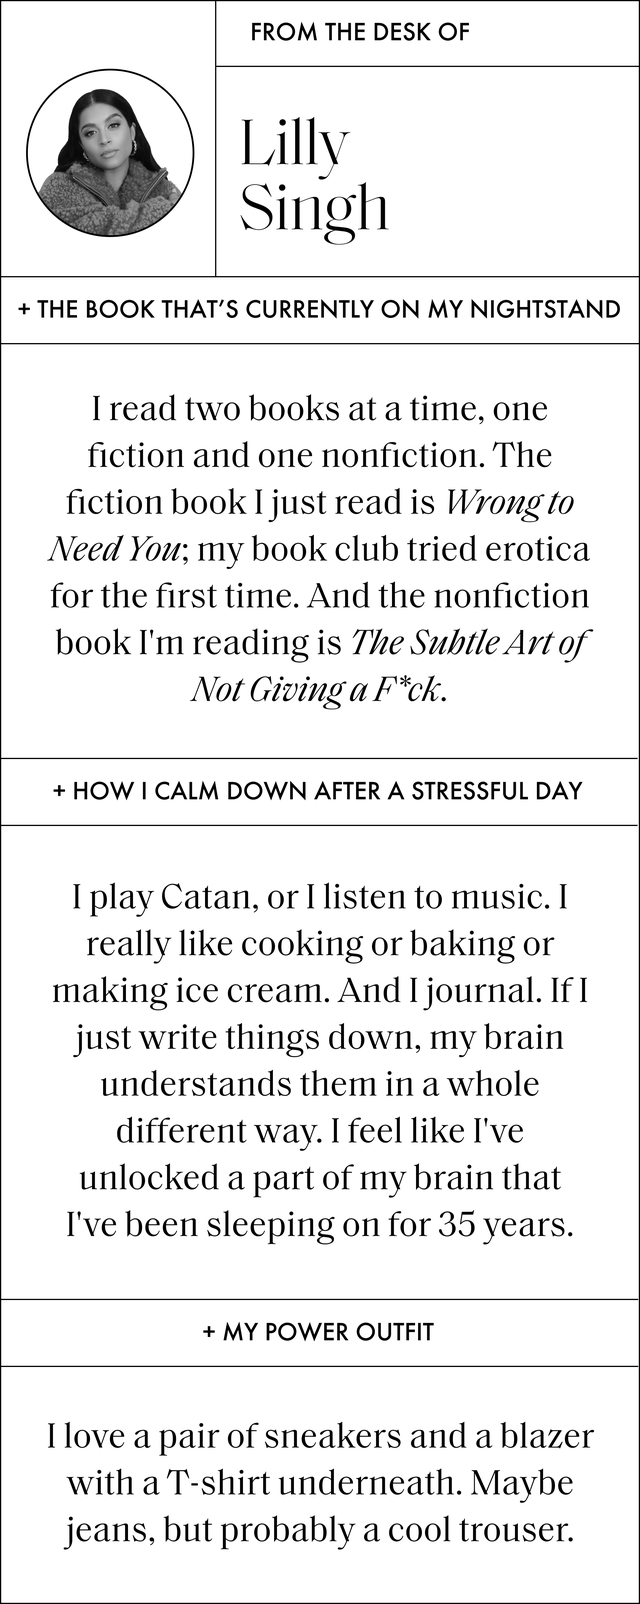 a q and a that reads the book that's currently on my nightstand i read two books at a time, one fiction and one nonfiction the fiction book i just read is wrong to need you my book club tried erotica for the first time and the nonfiction book i'm reading is the subtle art of not giving a fck how i calm down after a stressful day i play catan, or i listen to music i really like cooking or baking or making ice cream and i journal if i just write things down, my brain understands them in a whole different way i feel like i've unlocked a part of my brain that i've been sleeping on for 35 years my power outfit i love a pair of sneakers and a blazer with a tshirt underneath maybe jeans, but probably a cool trouser